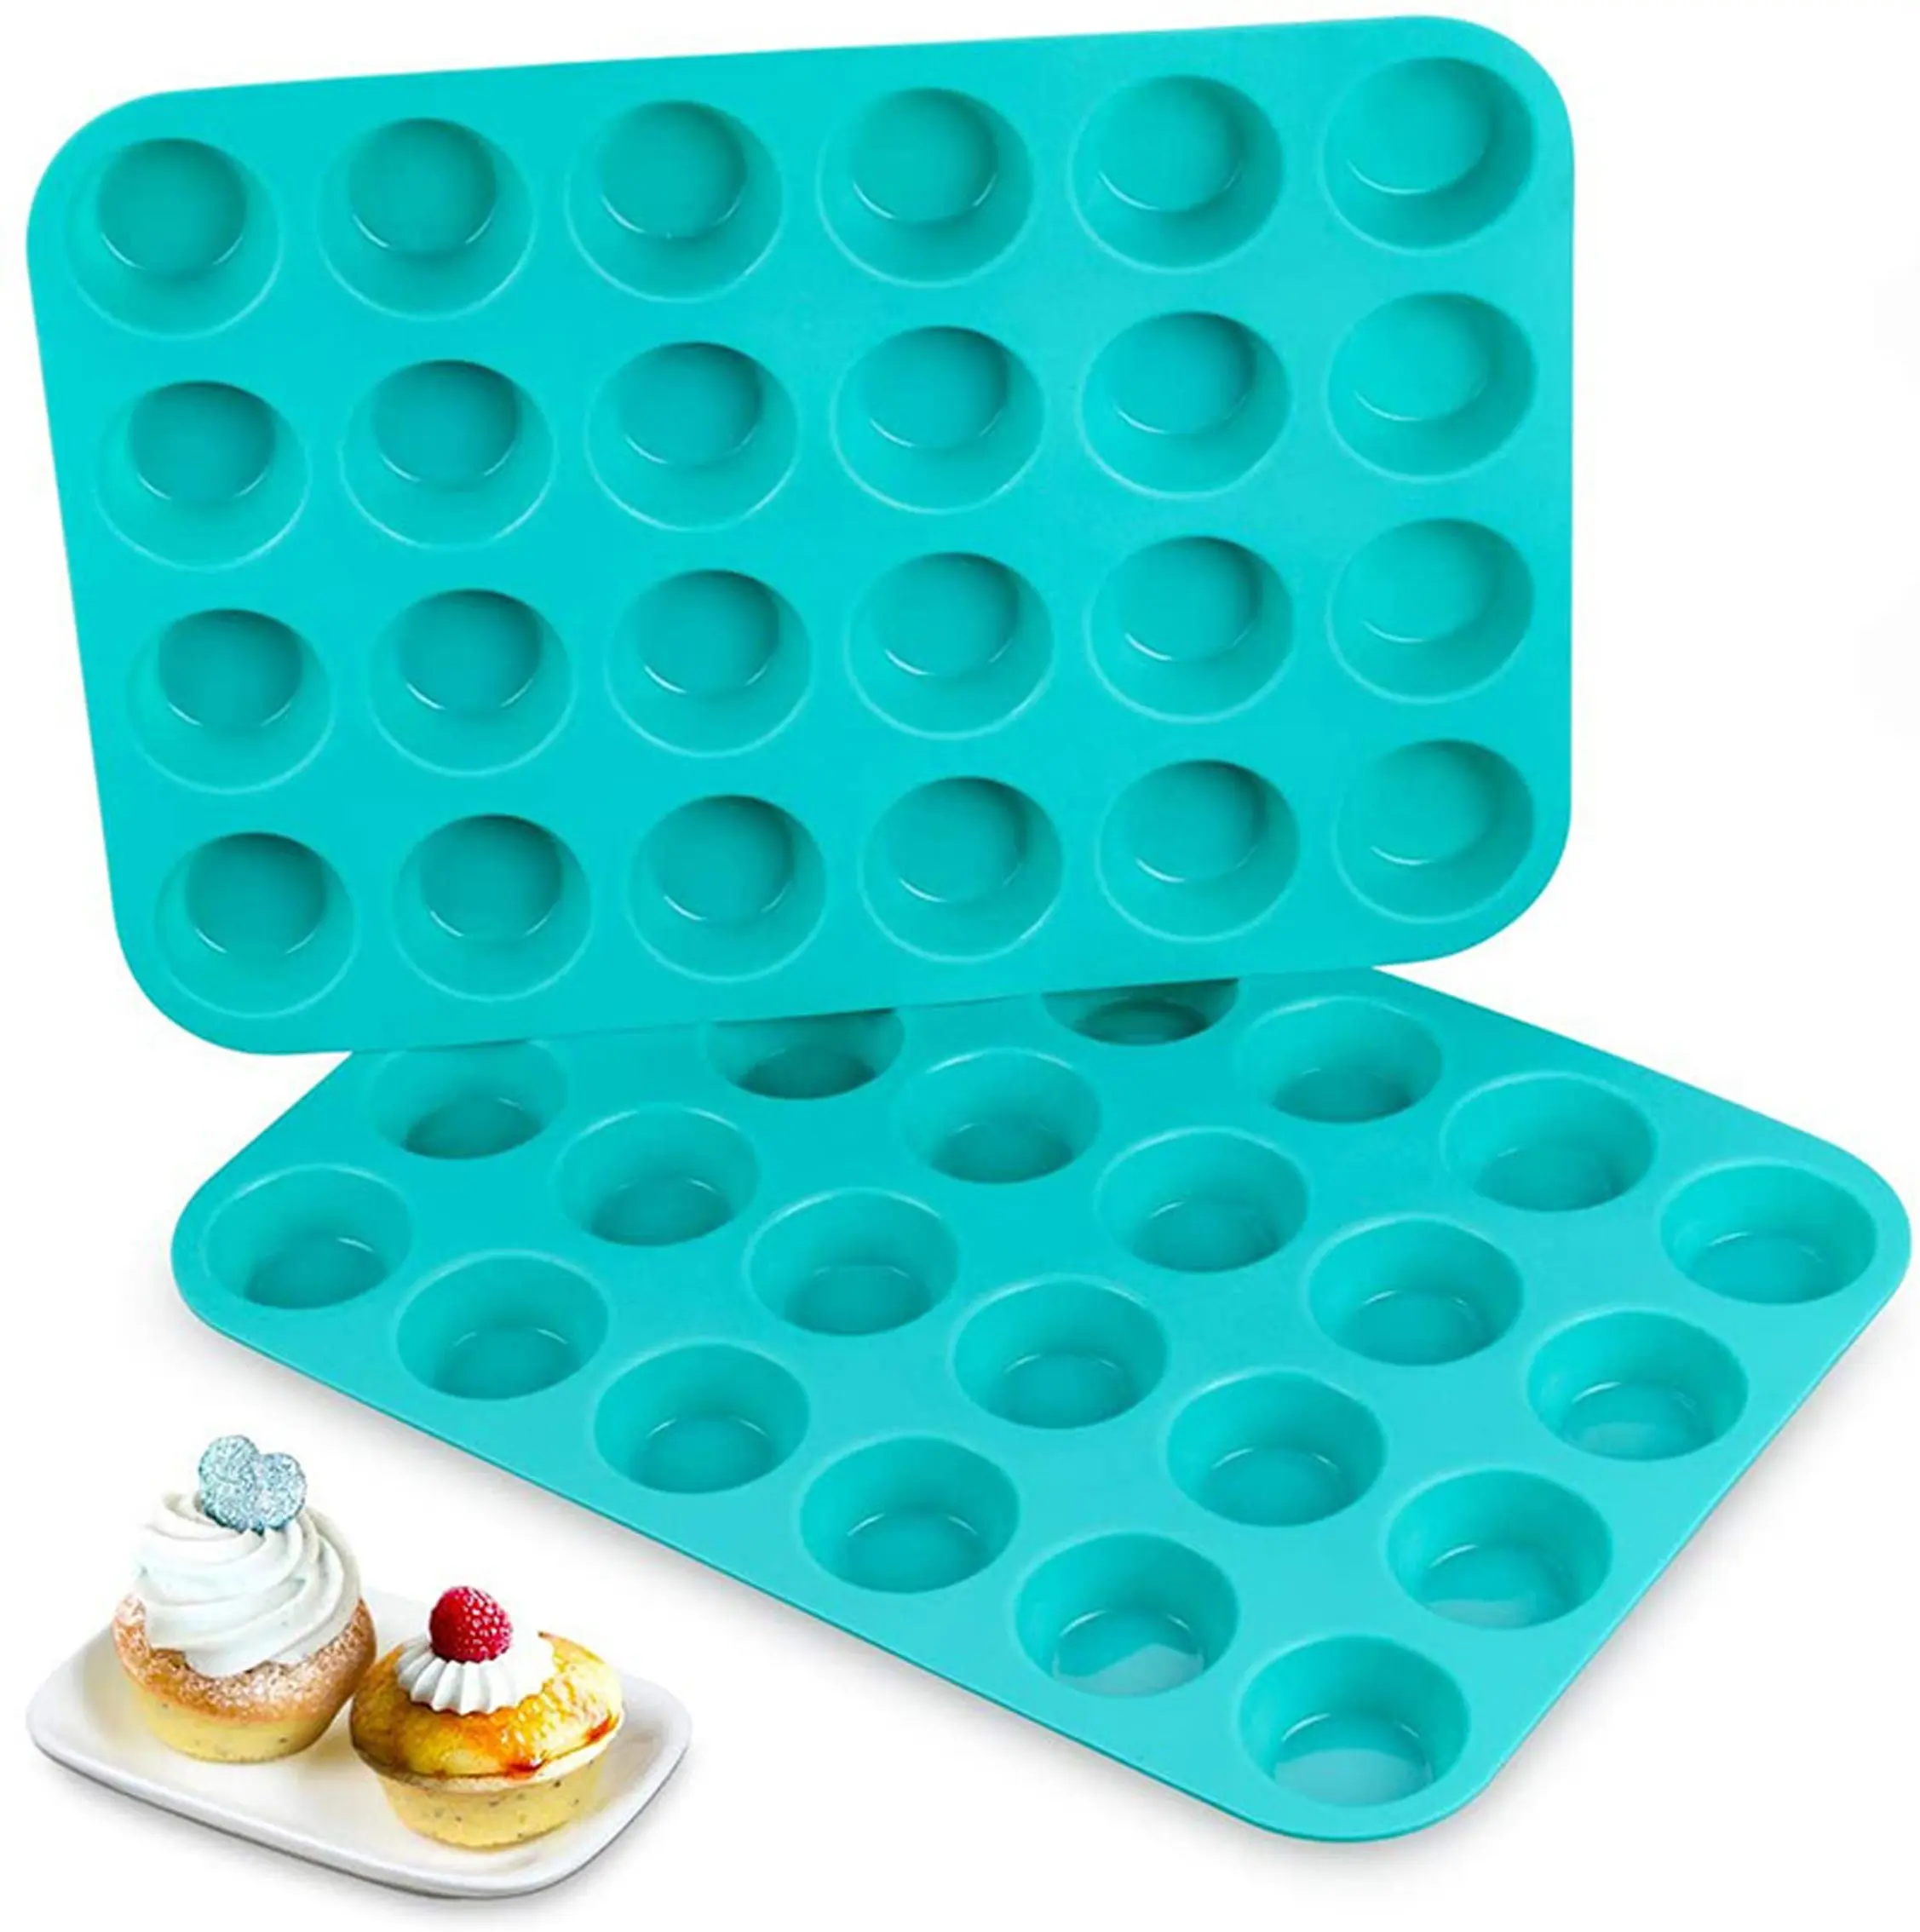 High Quality Thicken 24 Hole Round Silicone Mold Handmade Soap Mold Muffin Cup Cookie Mold Baking Tray For Cupcakes